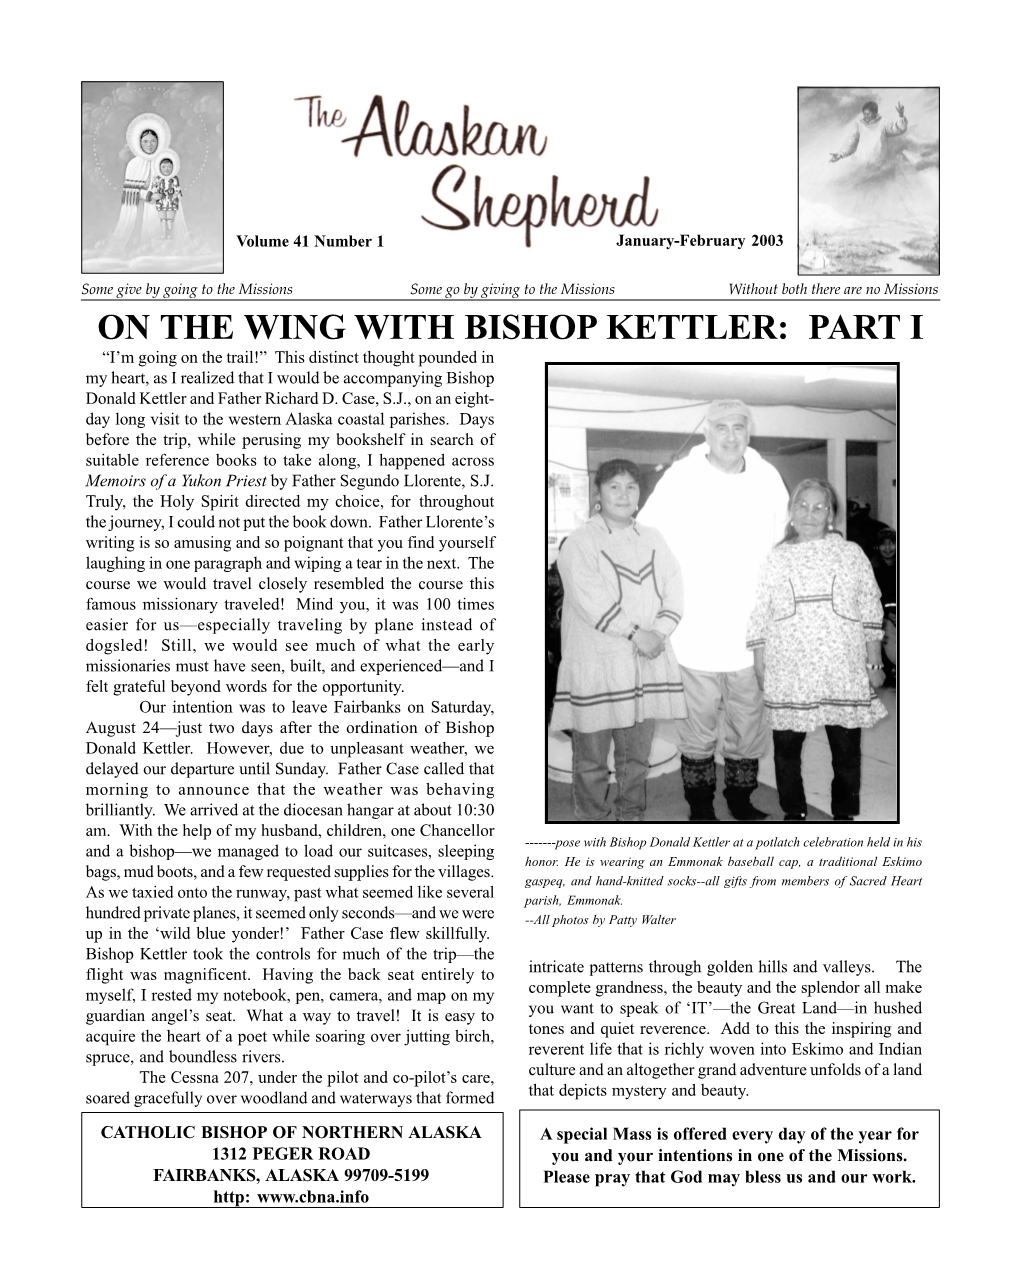 On the Wing with Bishop Kettler